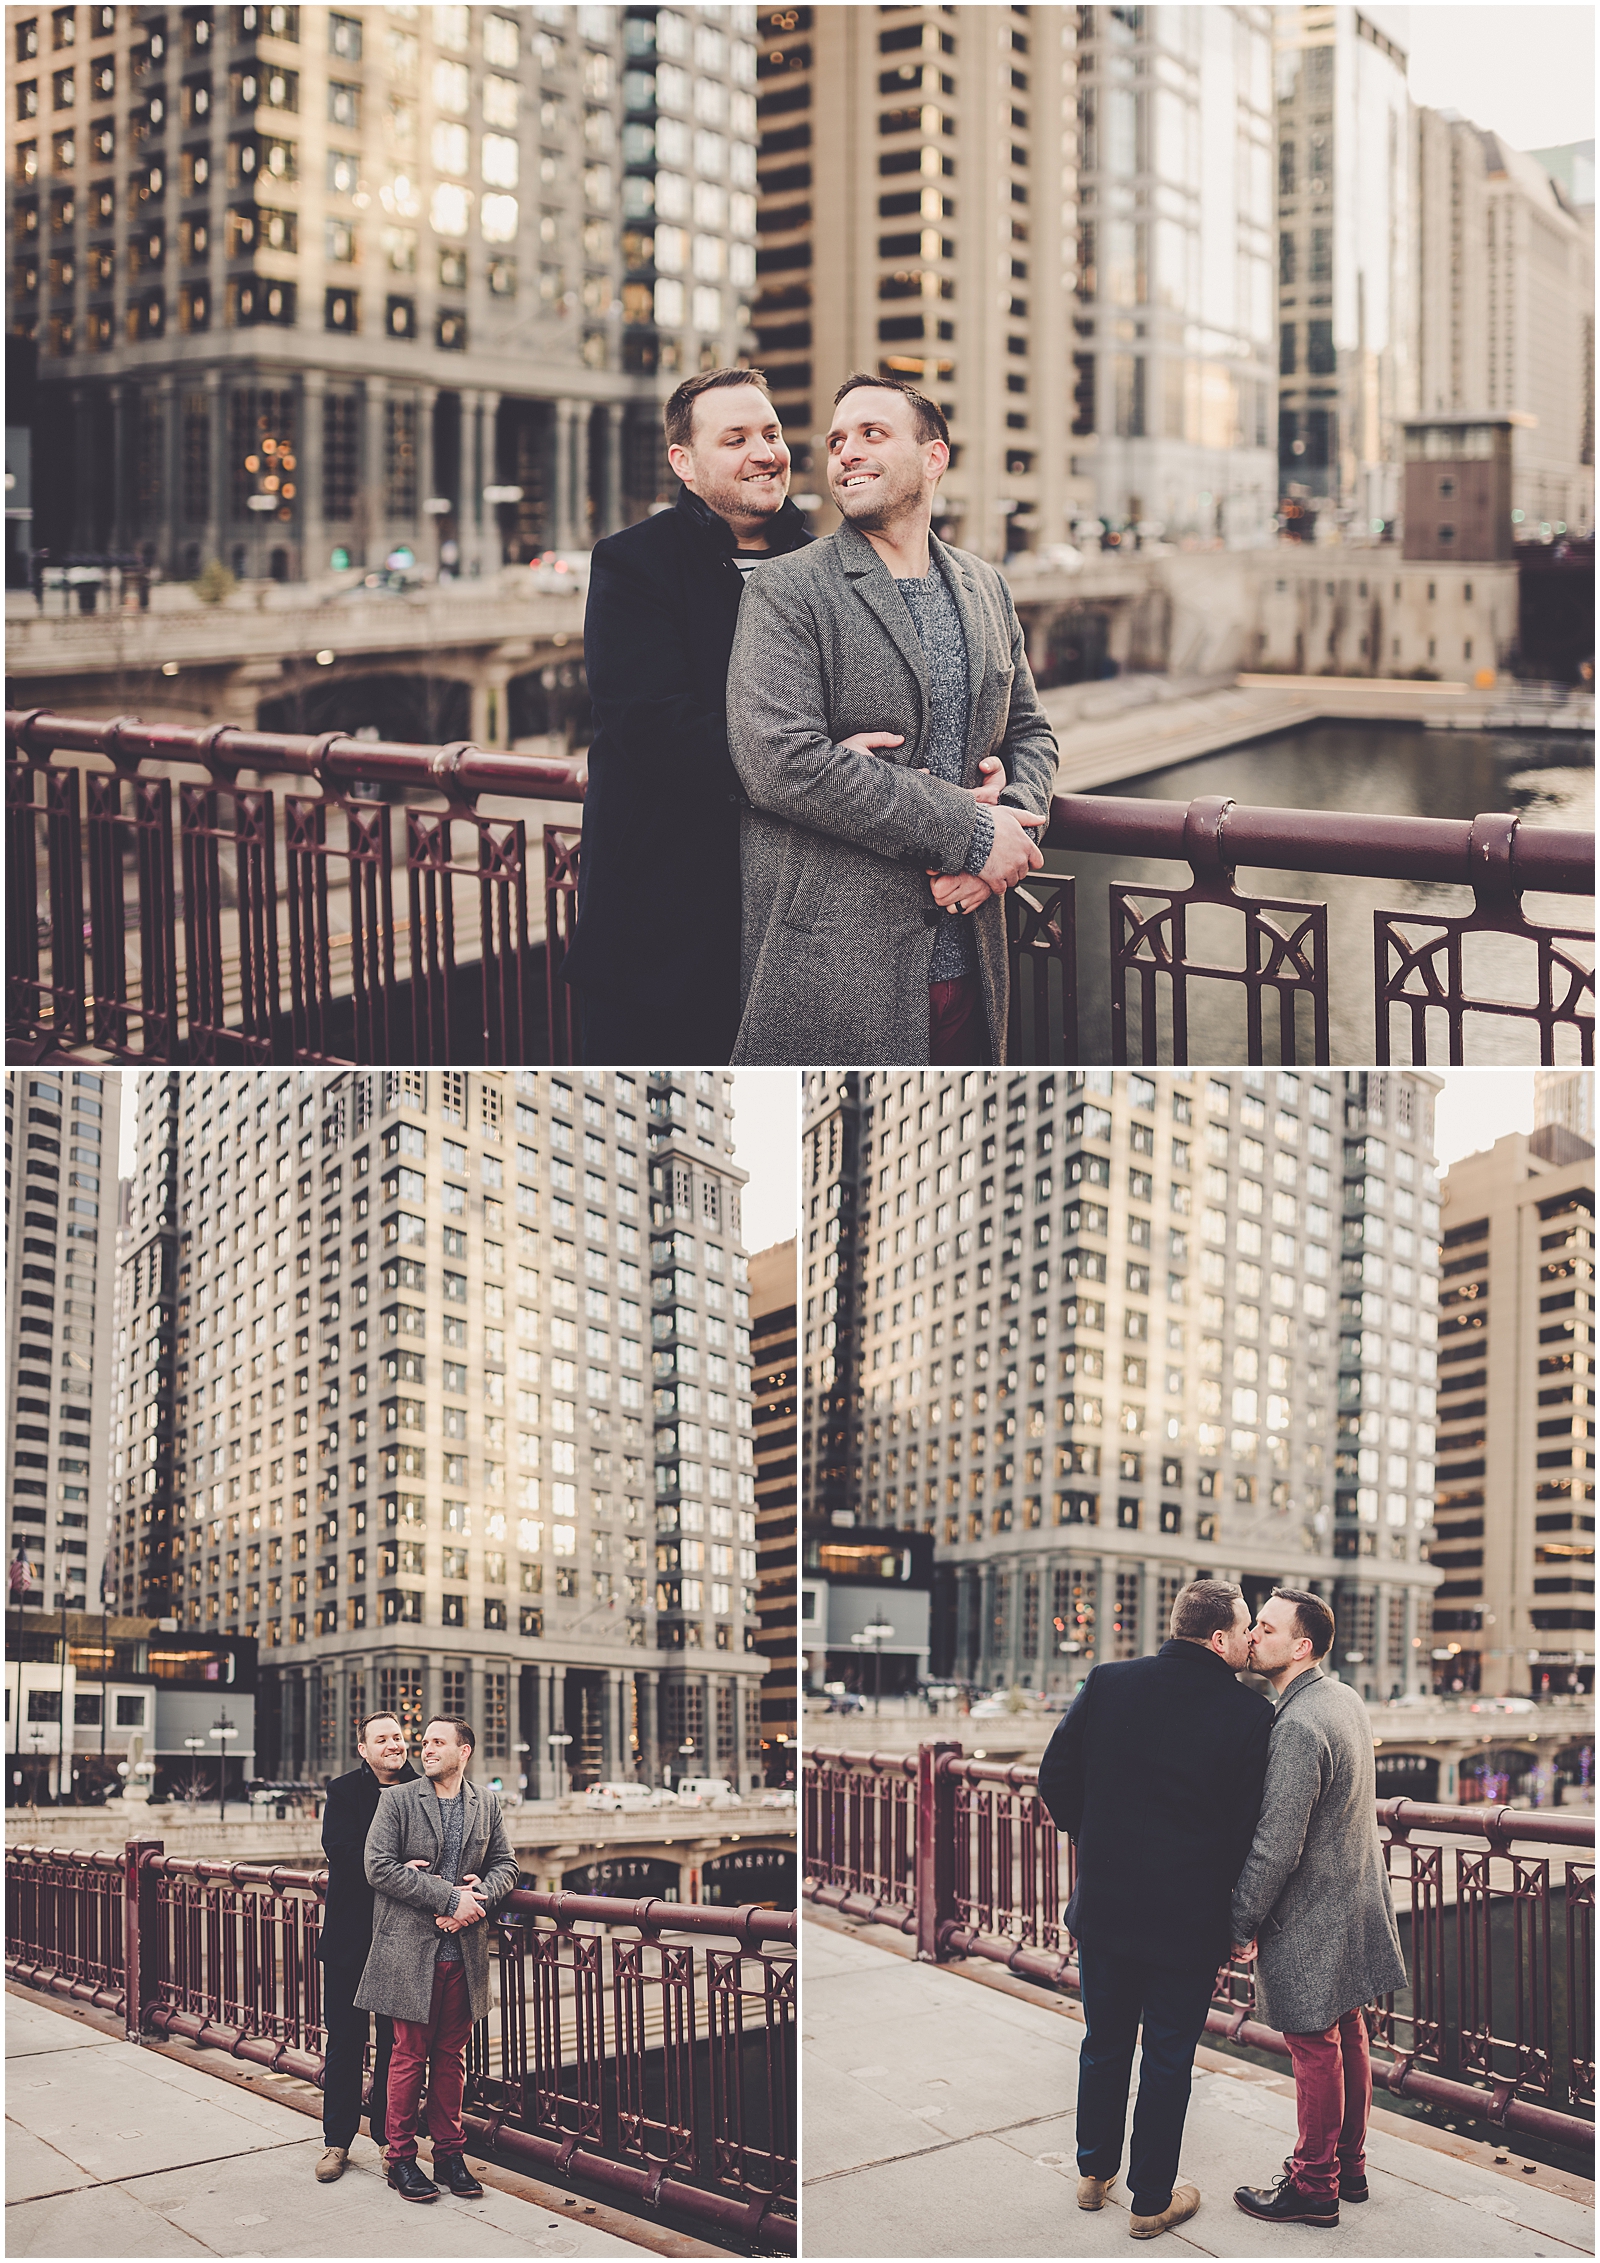 Ben & Michael's Wrigley Building & North Avenue Beach skyline engagement photos in Chicago with Chicago photographer Kara Evans Photographer.